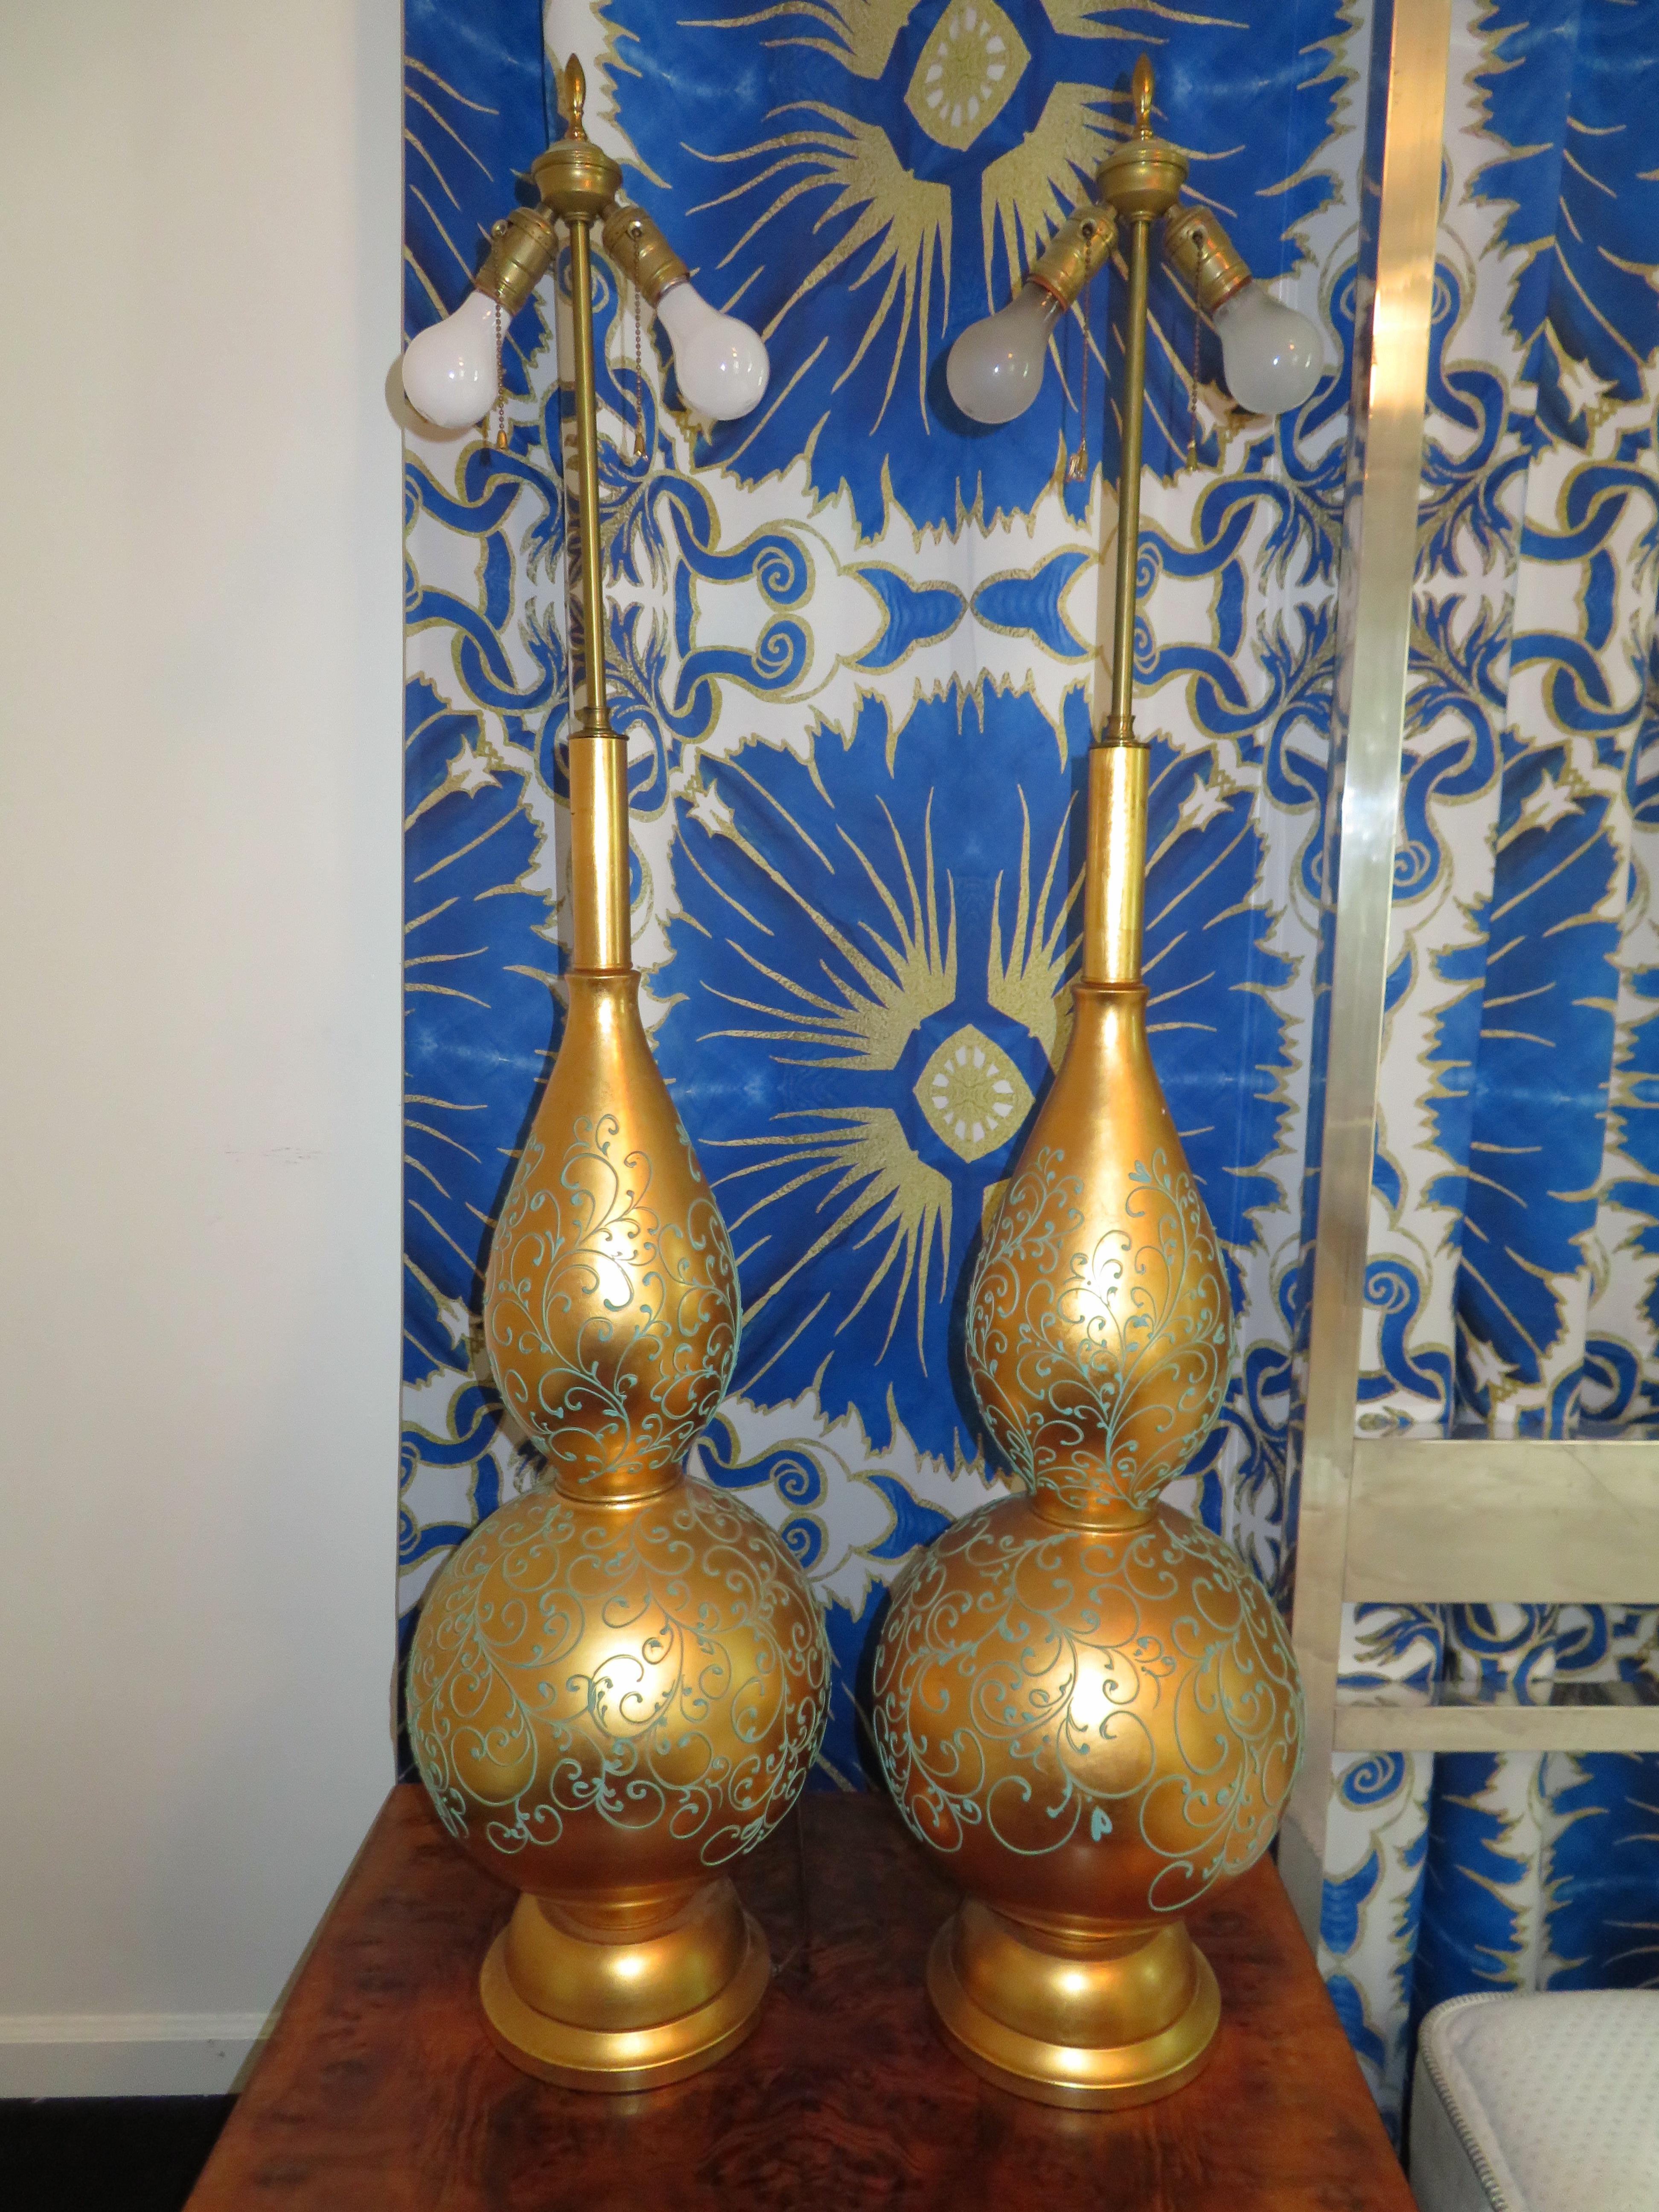 Monumental and magnificent pair of gold leaf gourd shaped lamps with their original golden shades. There are no words to describe how absolutely fabulous these lamps truly are. They are a whopping 52